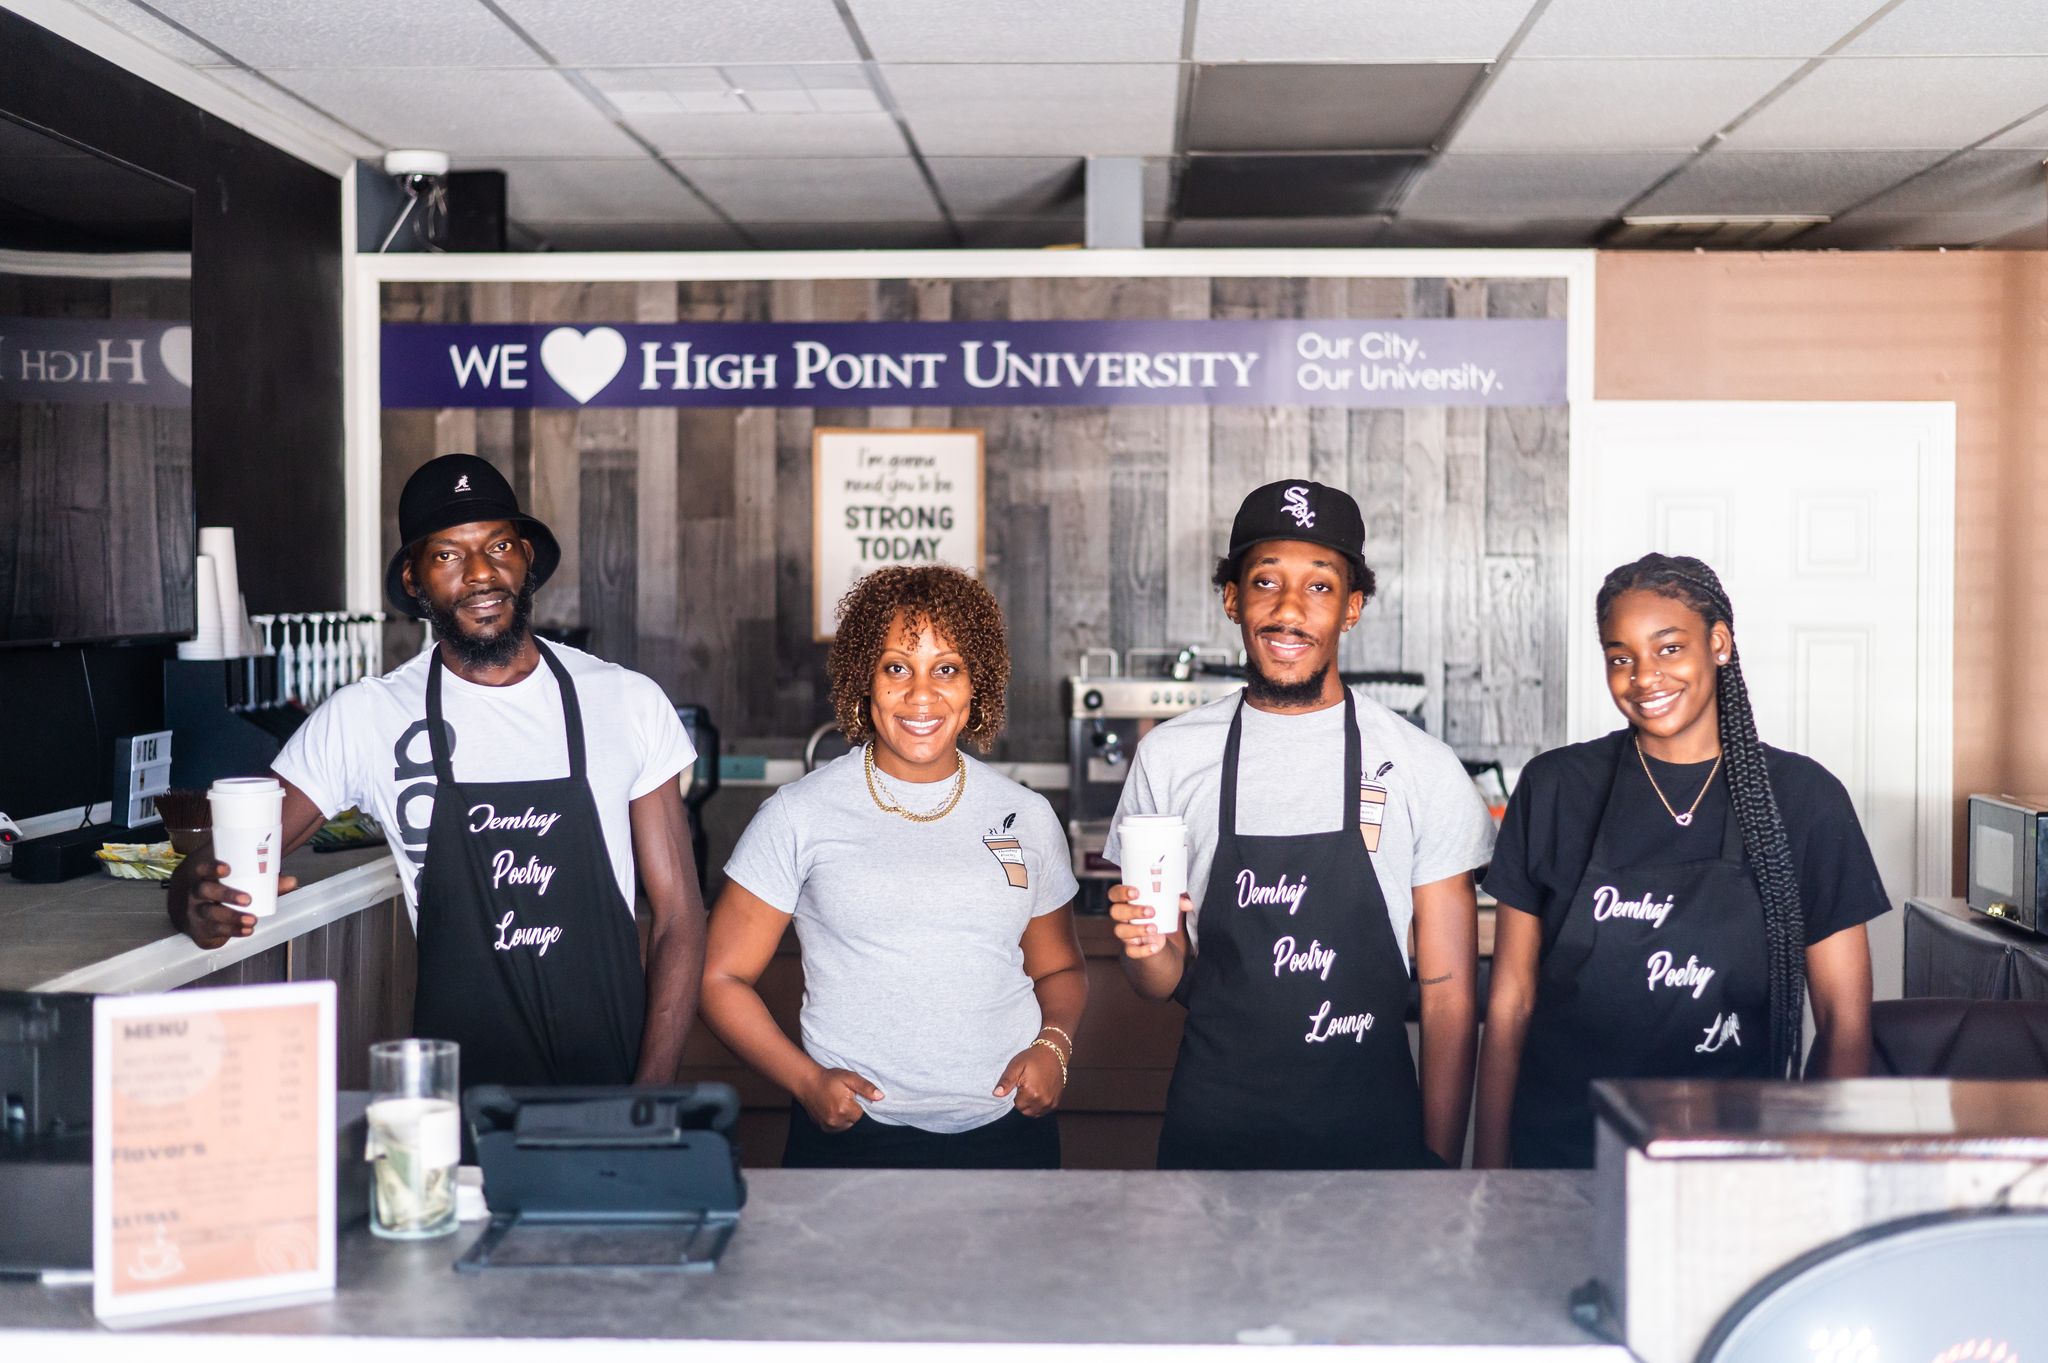 The staff at Demhaj Poetry Lounge stands behind the counter at the High Point coffee shop.